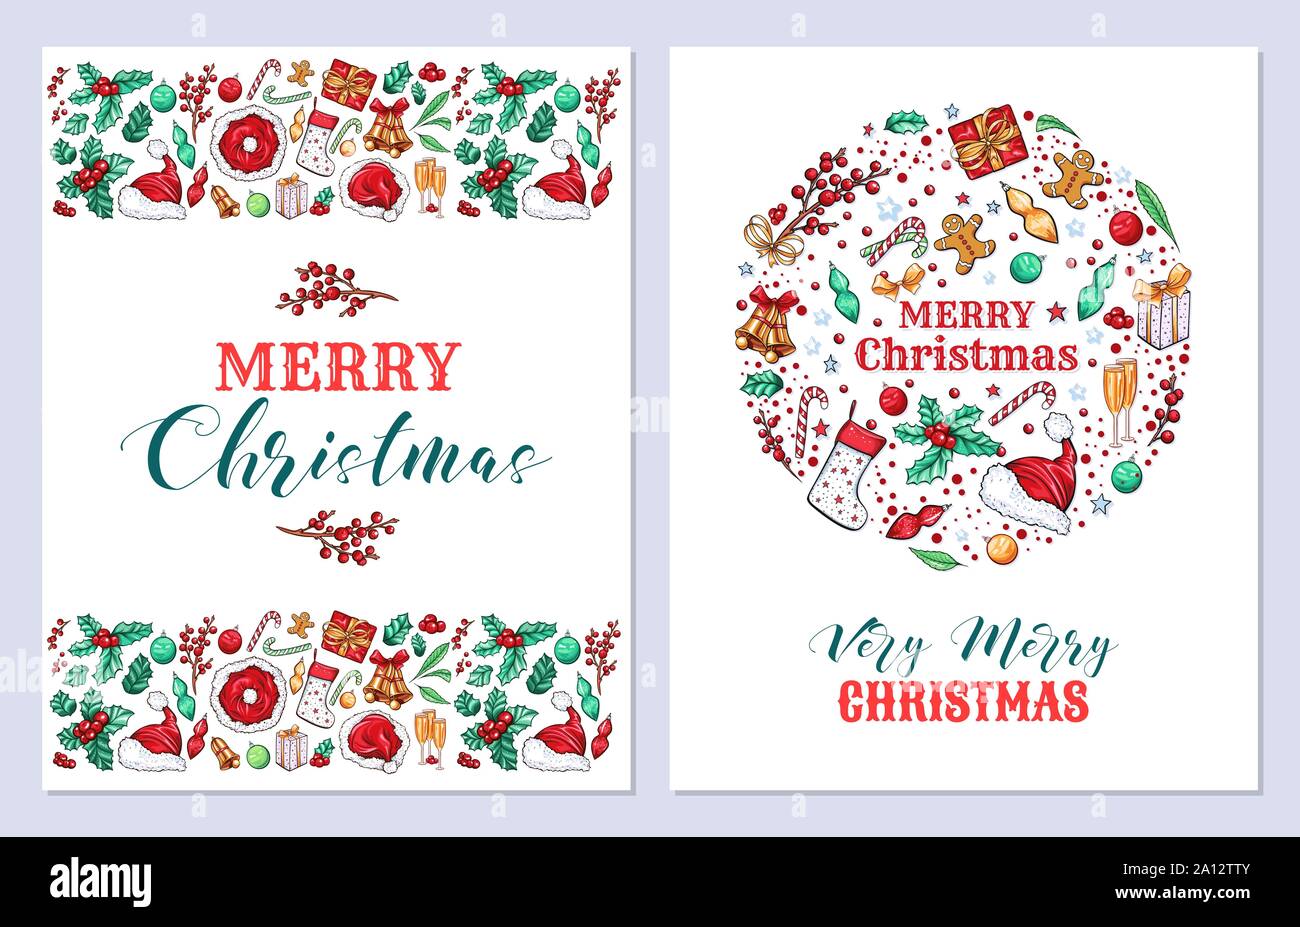 Christmas holiday greeting cards vector templates set. New Year postcards design pack. Mistletoe, bells winter traditional symbols and lettering on white background. Xmas celebration invitation layout Stock Vector